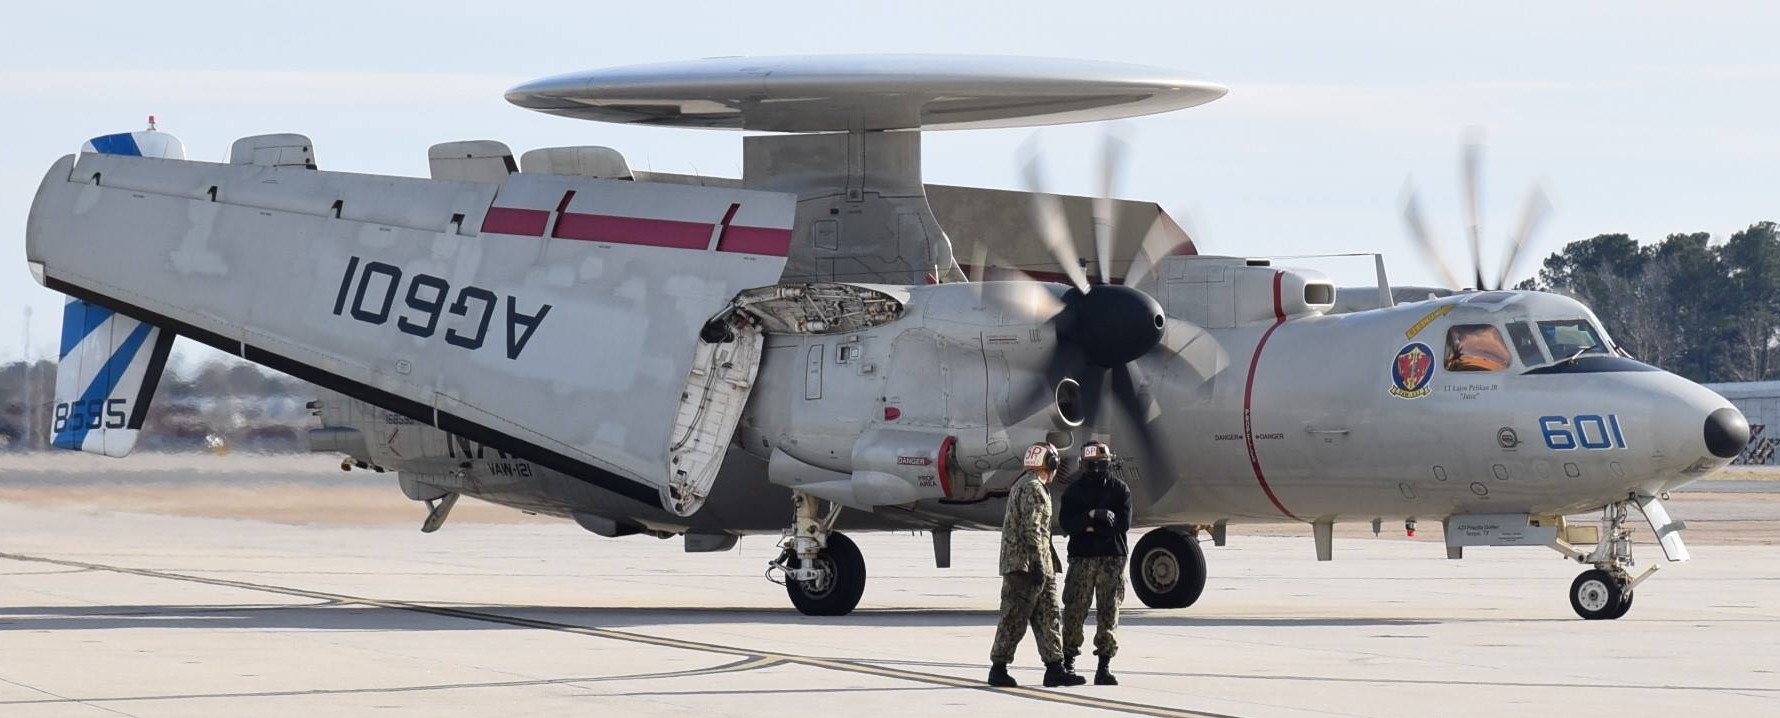 vaw-121 bluetails airborne command and control squadron us navy e-2d advanced hawkeye cvw-7 uss abraham lincoln cvn-72 67